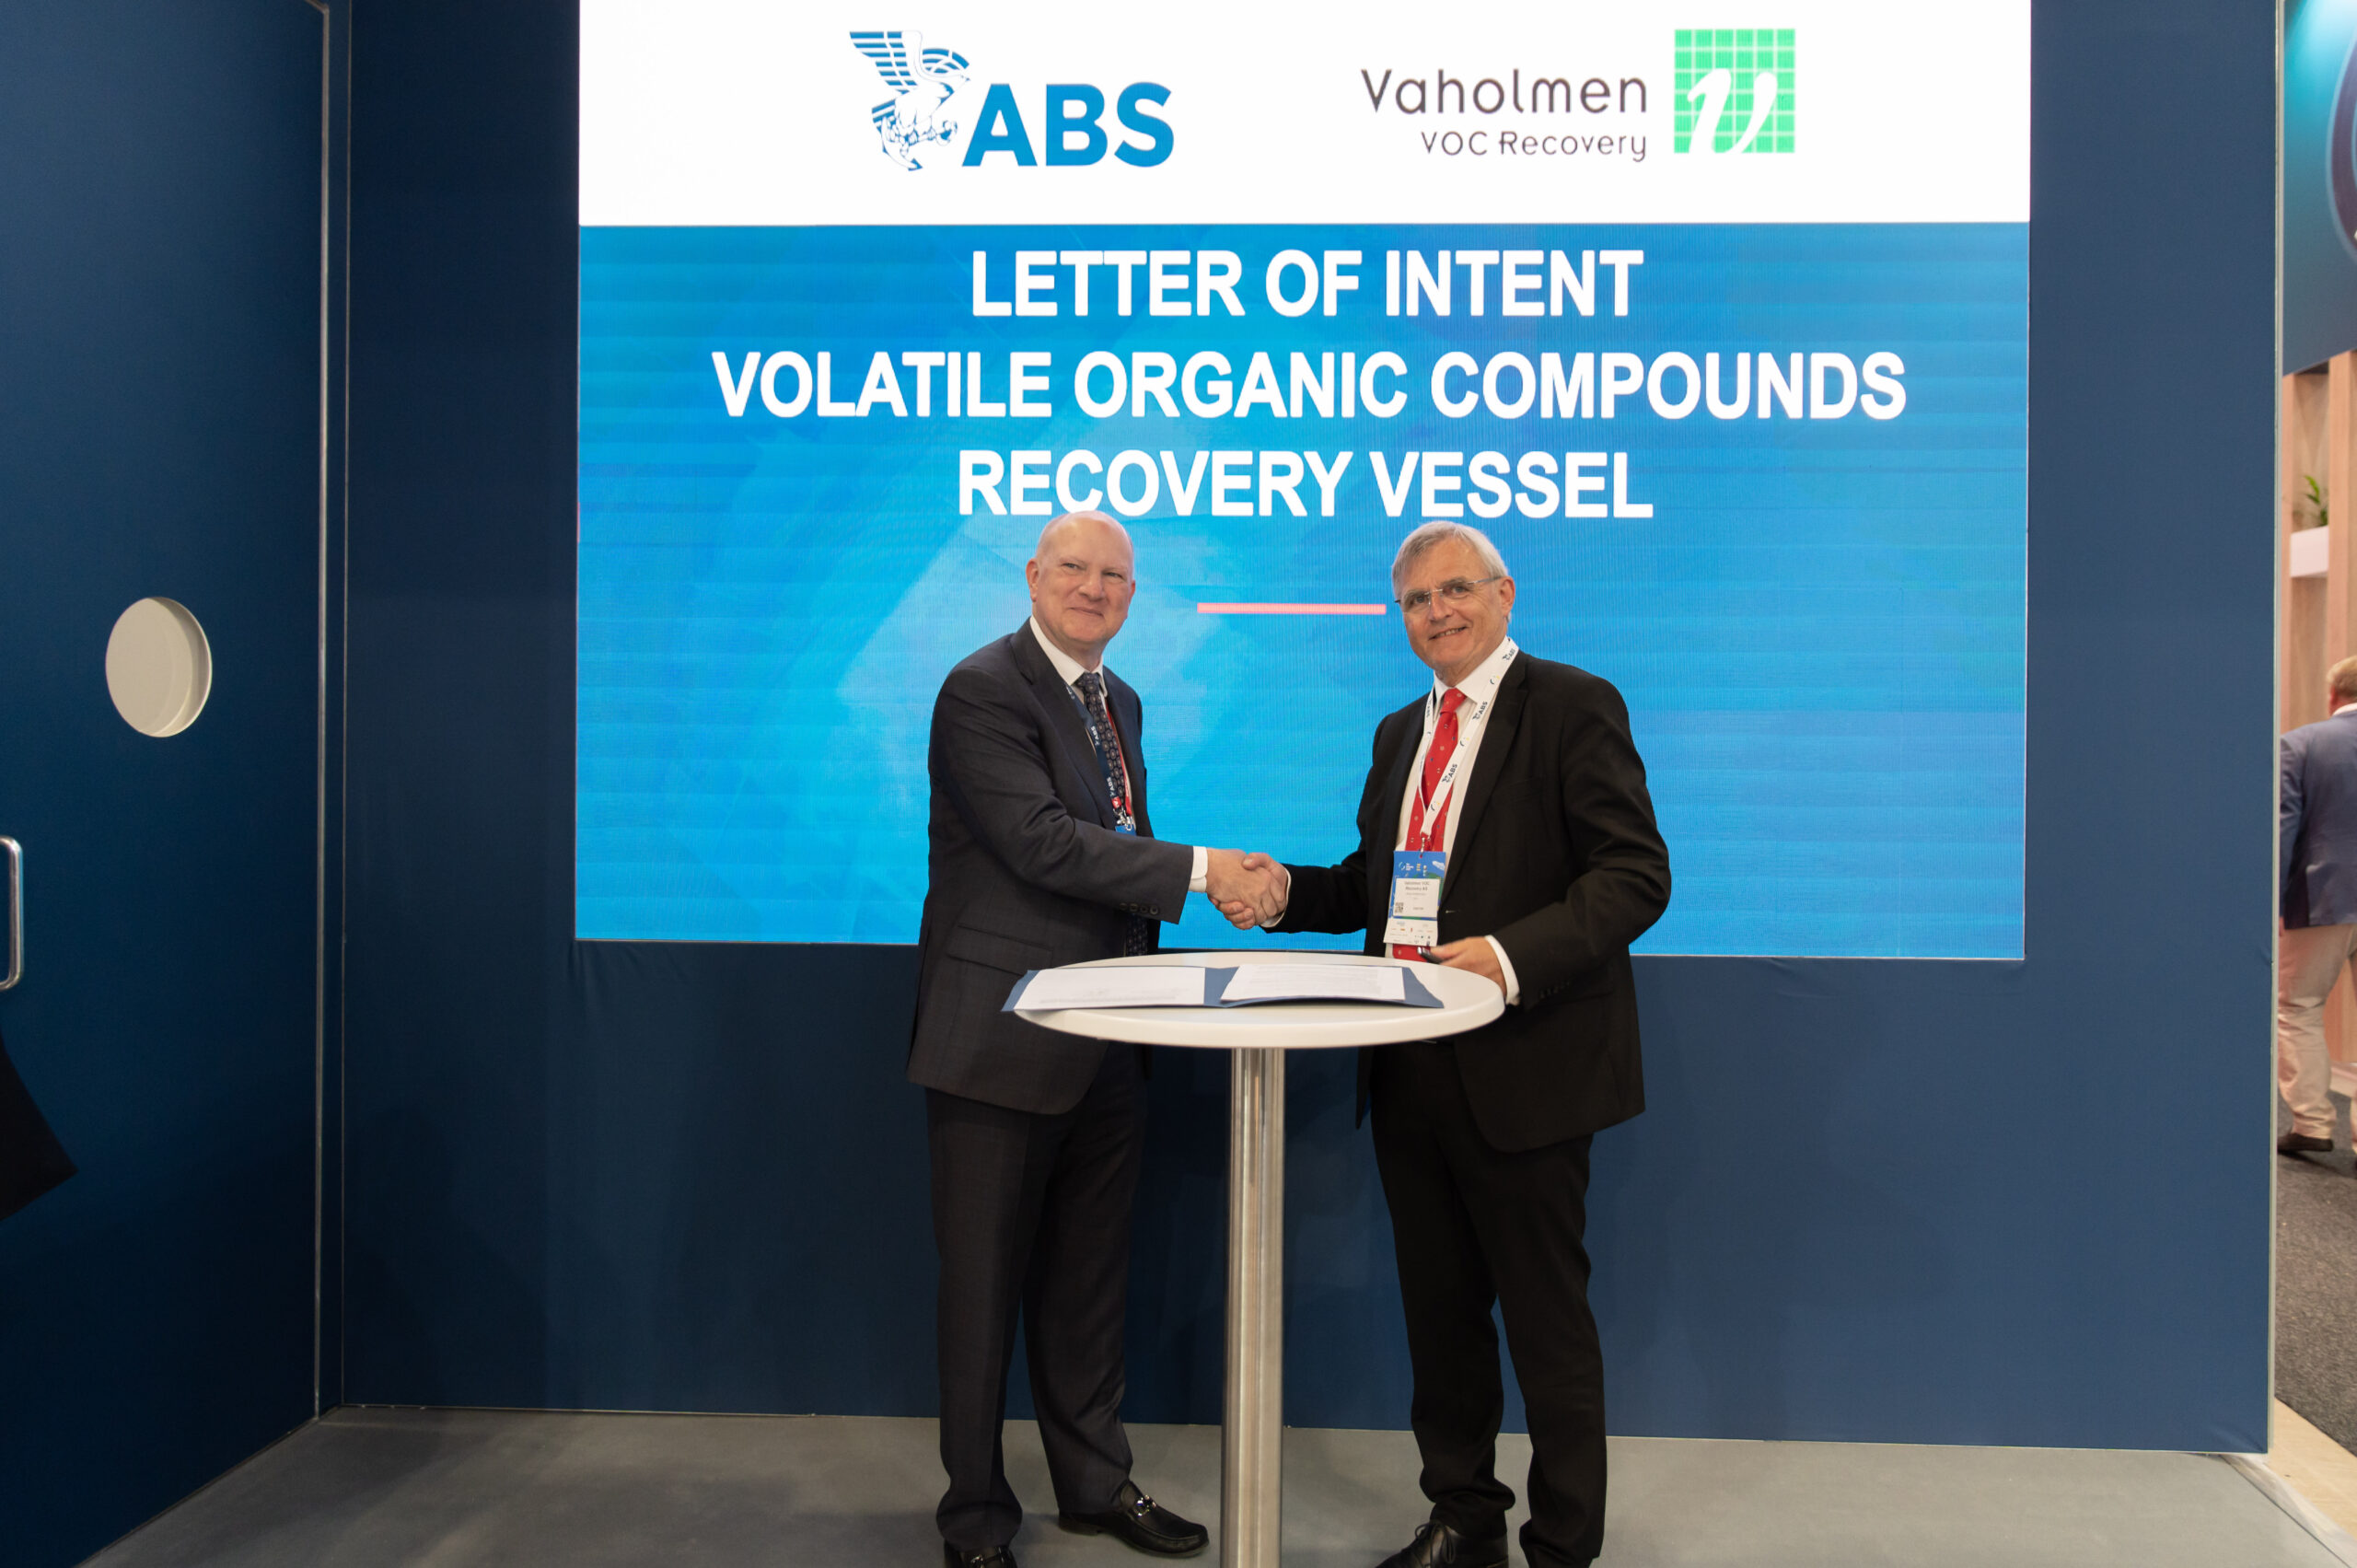 Photo Caption: John McDonald, ABS Executive Vice President and COO, with Arve Andersson, Vaholmen Chief Executive Officer  